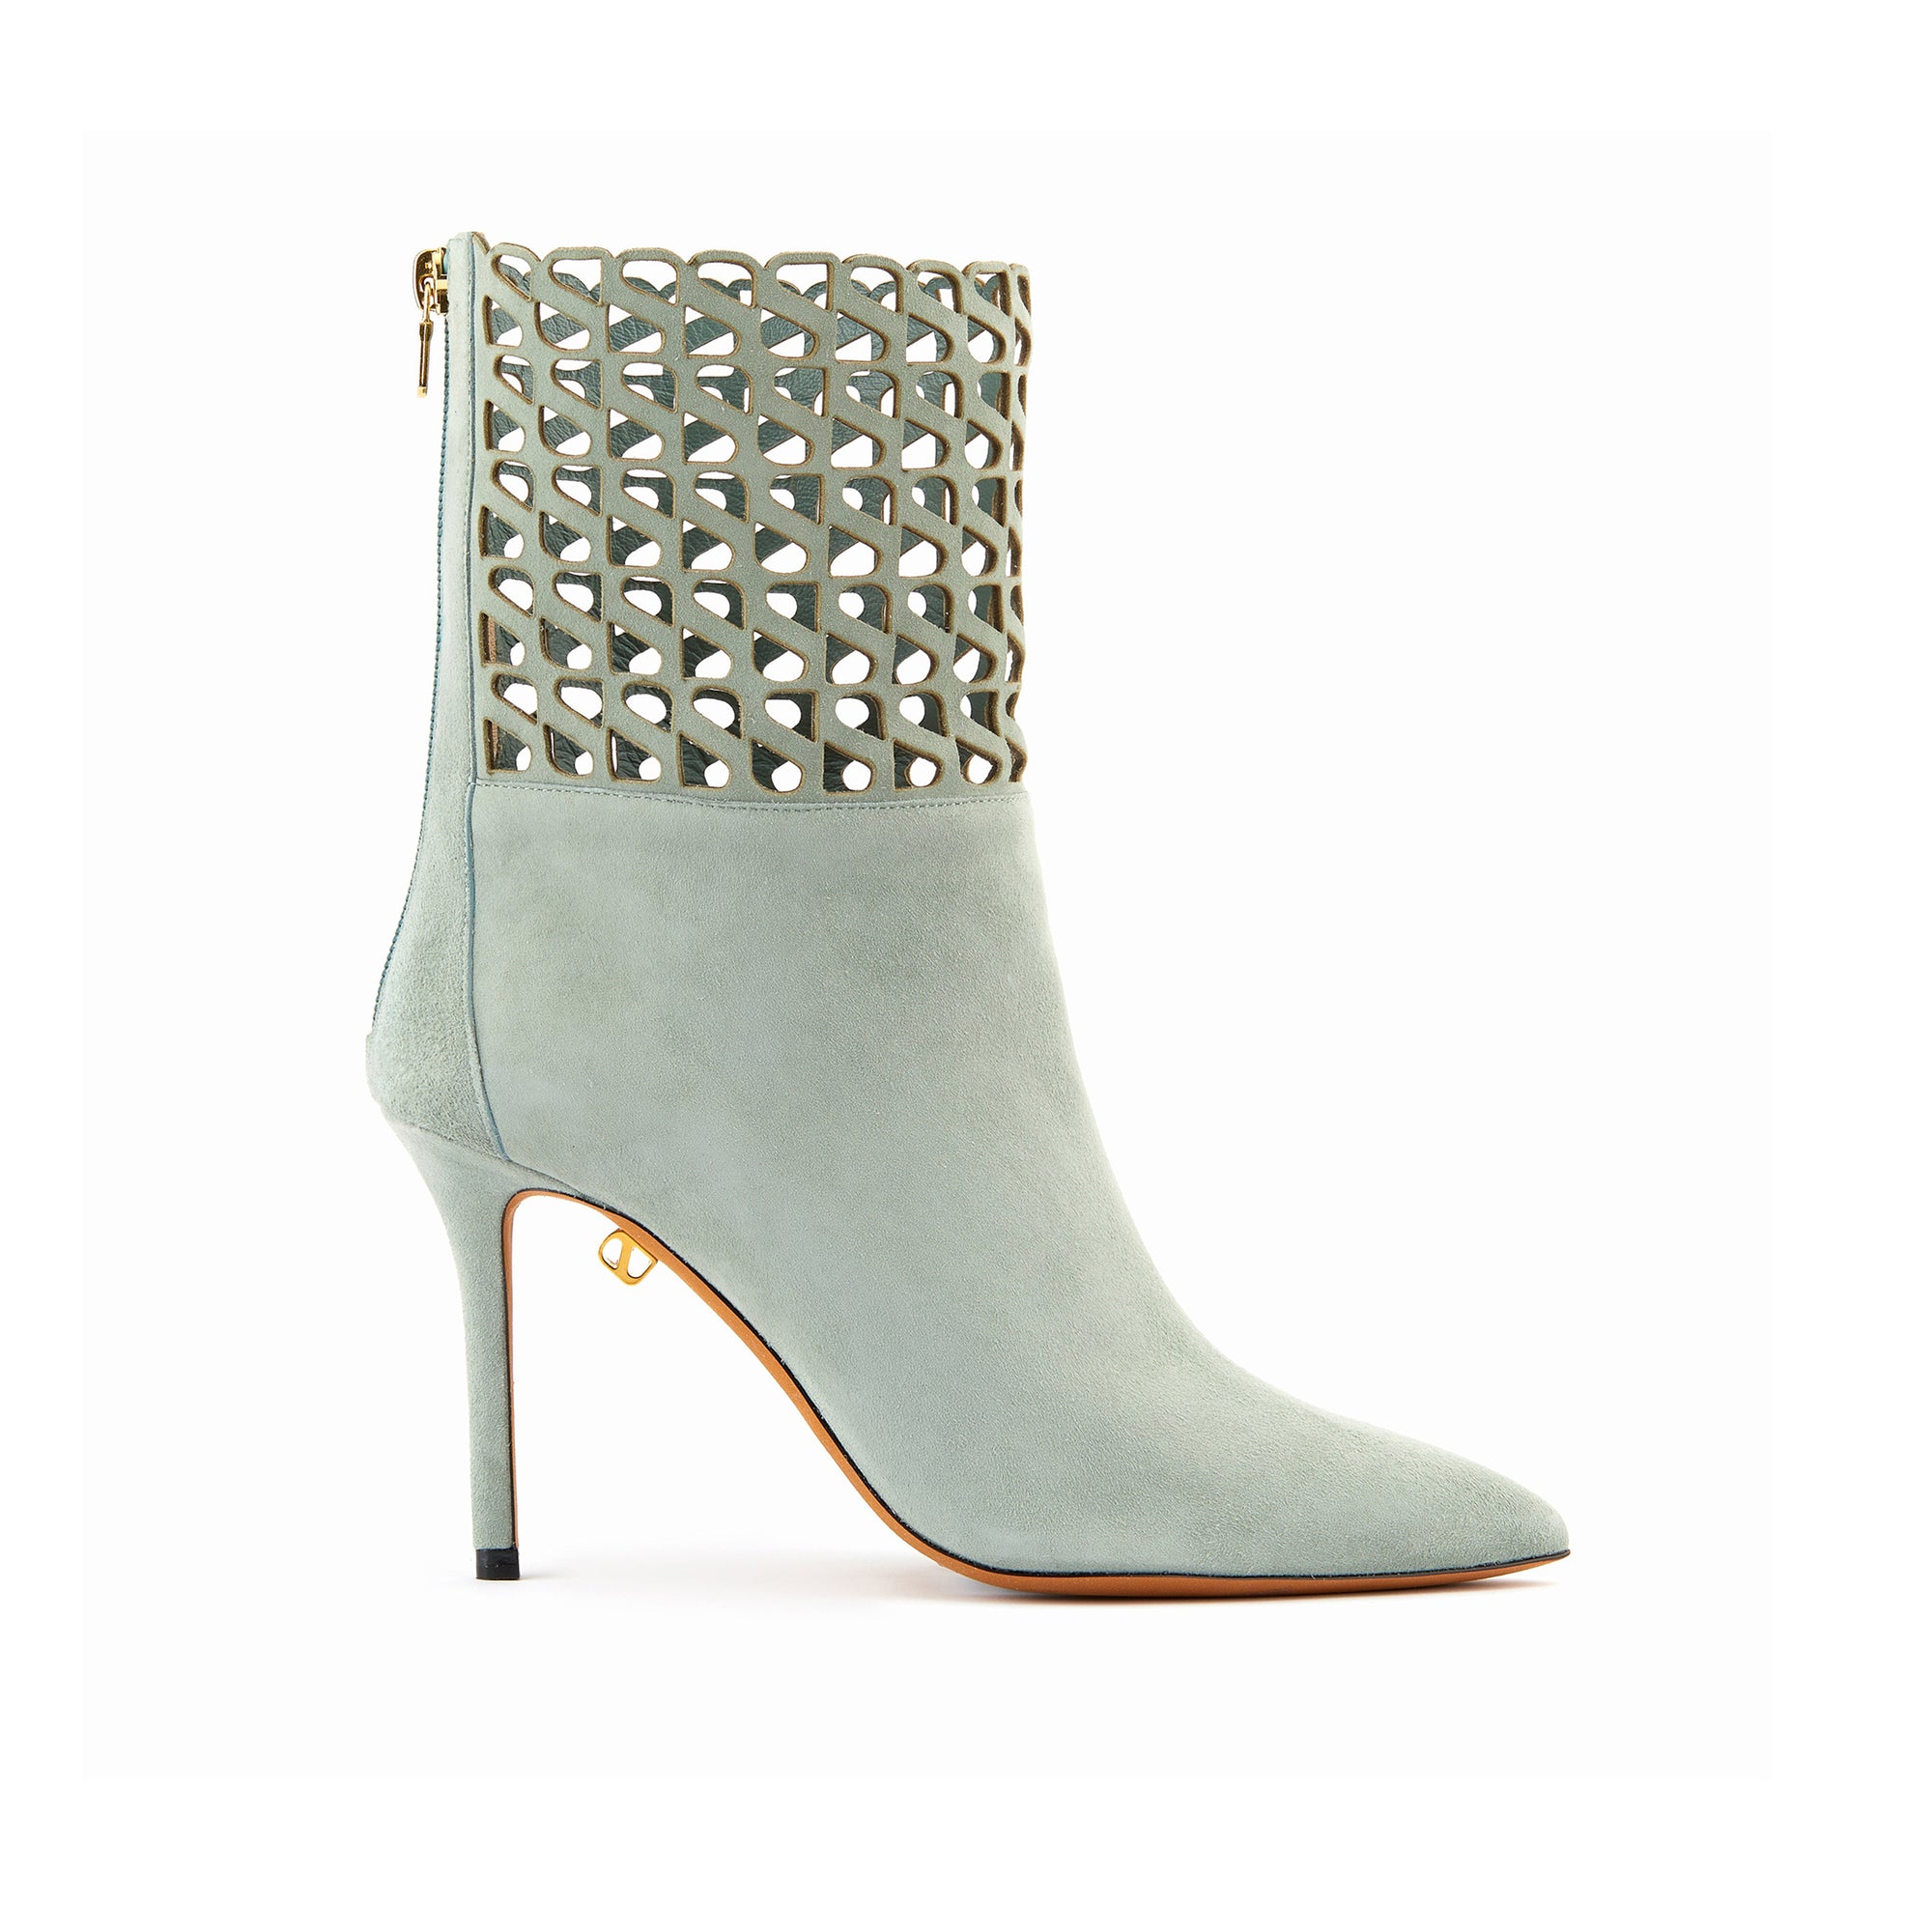 Alexia 90 heeled boots in suede - Peppermint